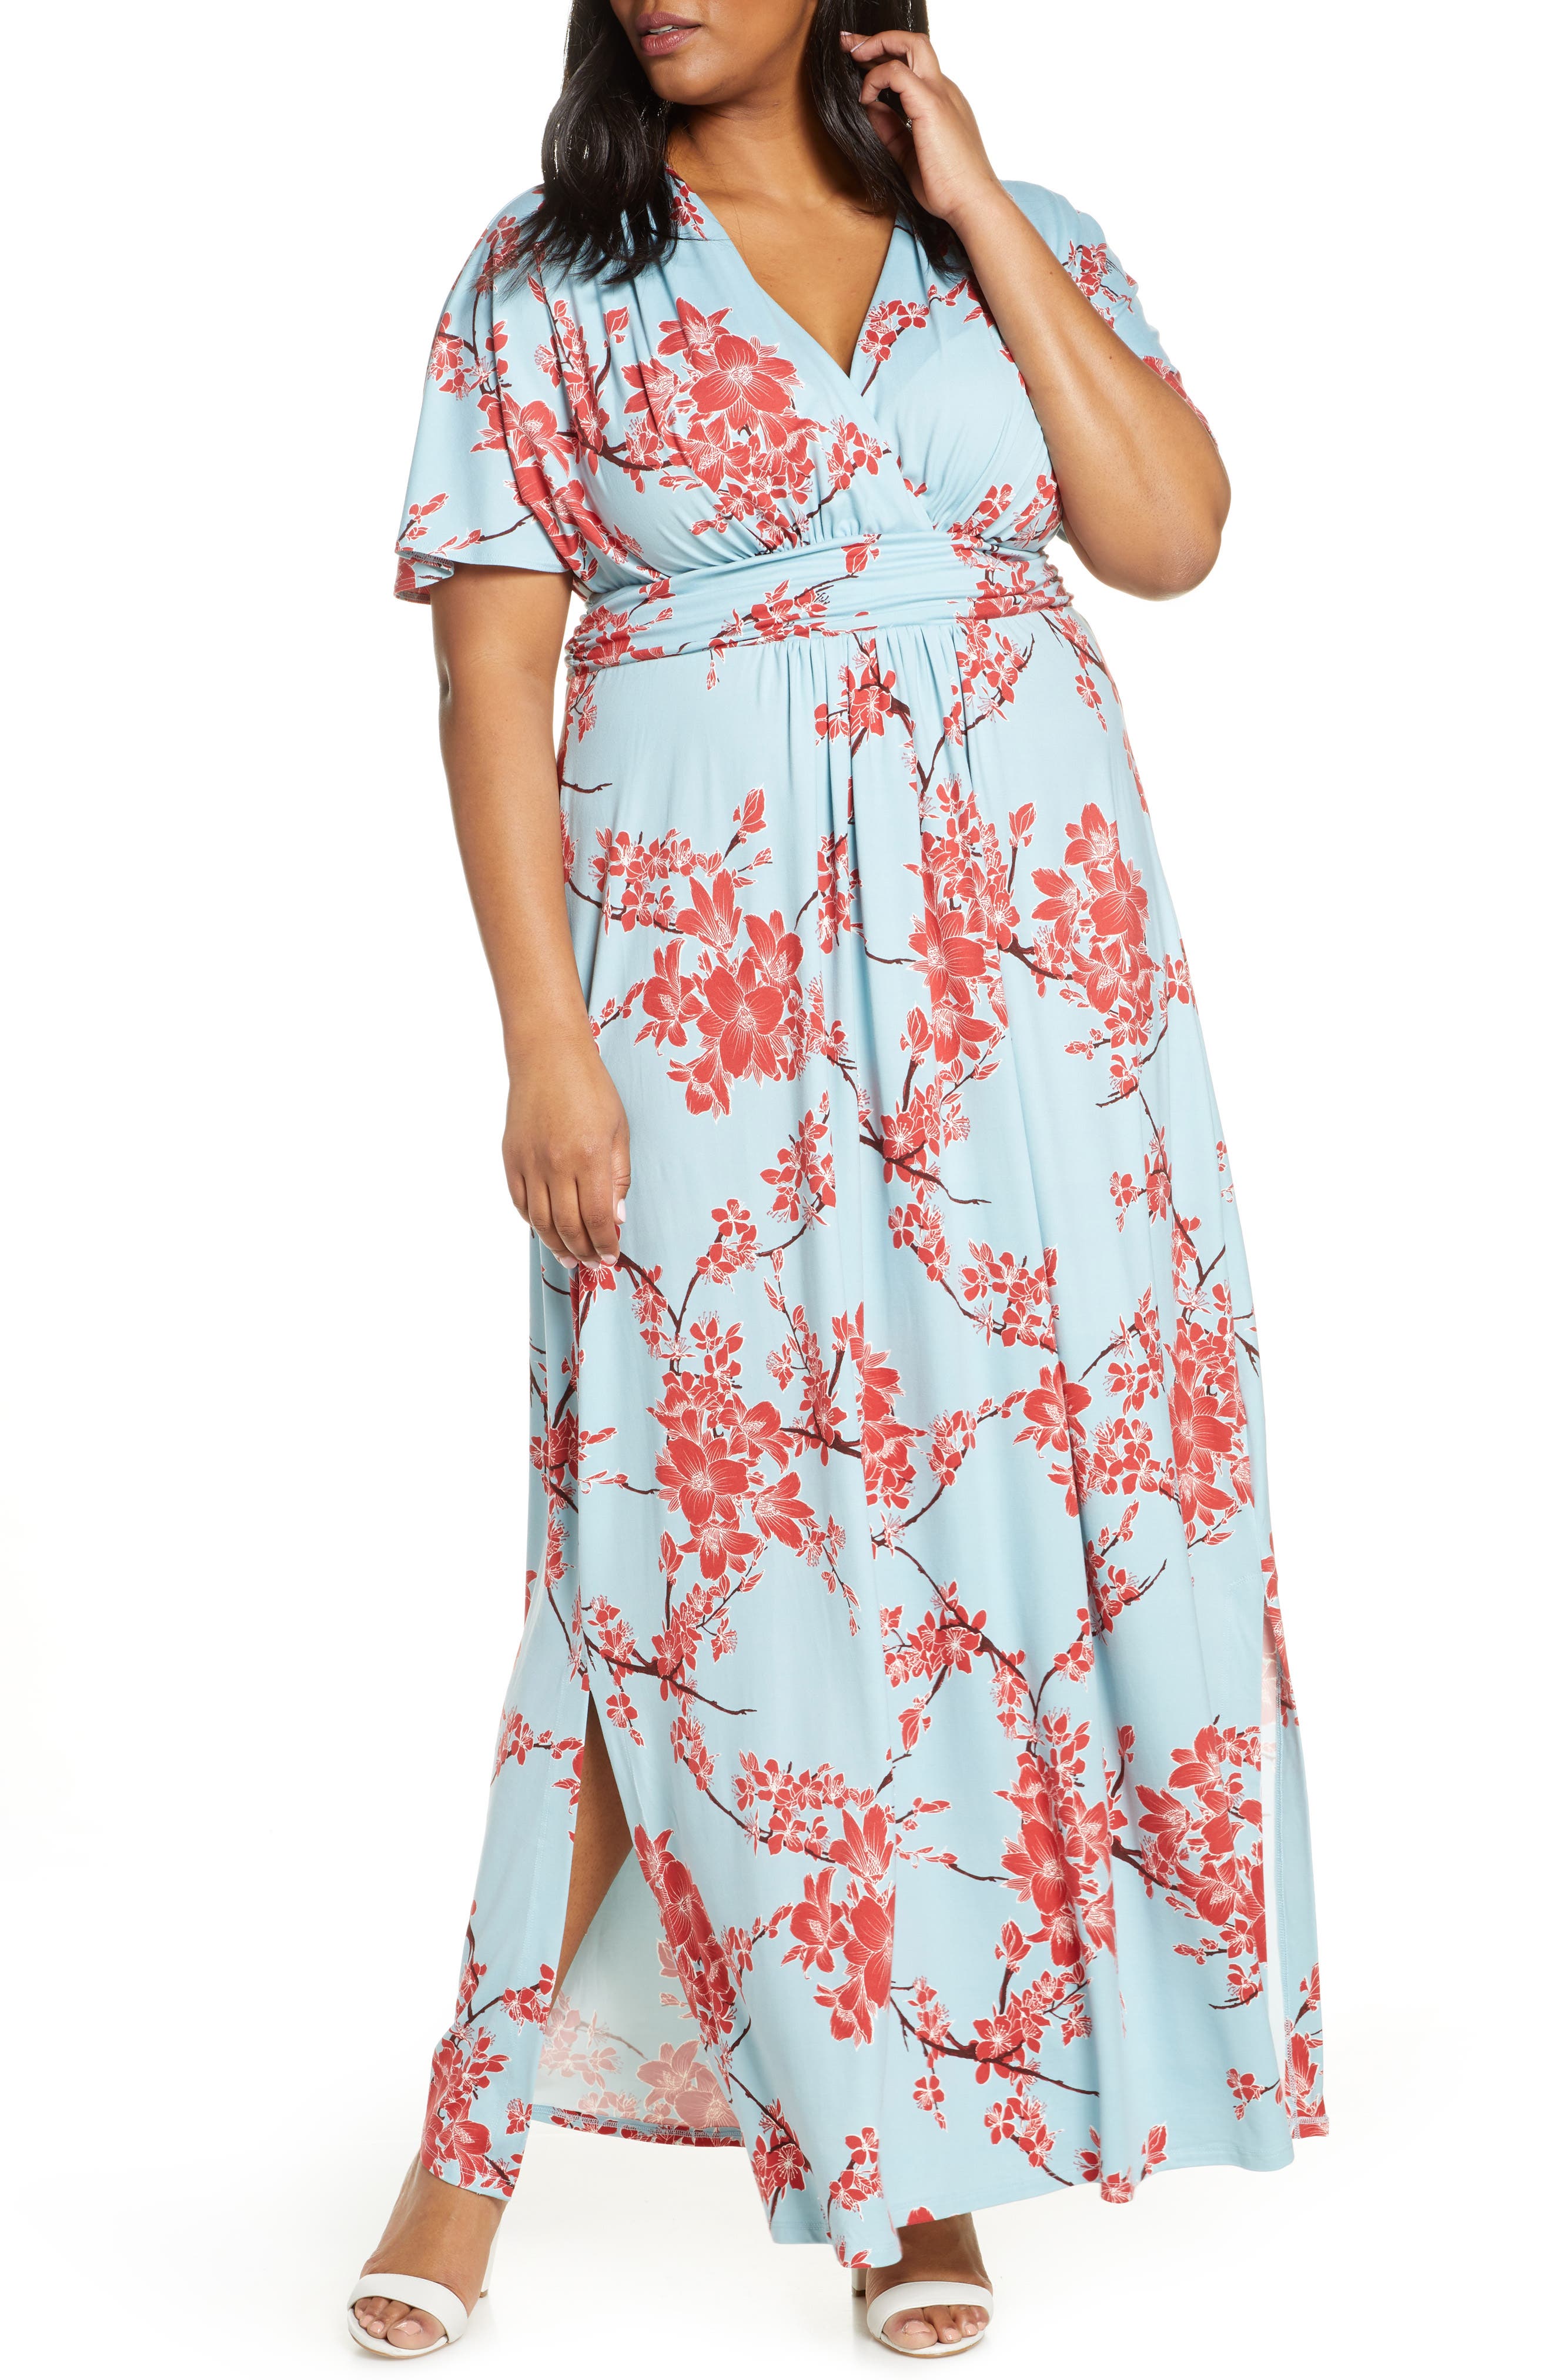 Casual Plus Size Dresses for Women ...